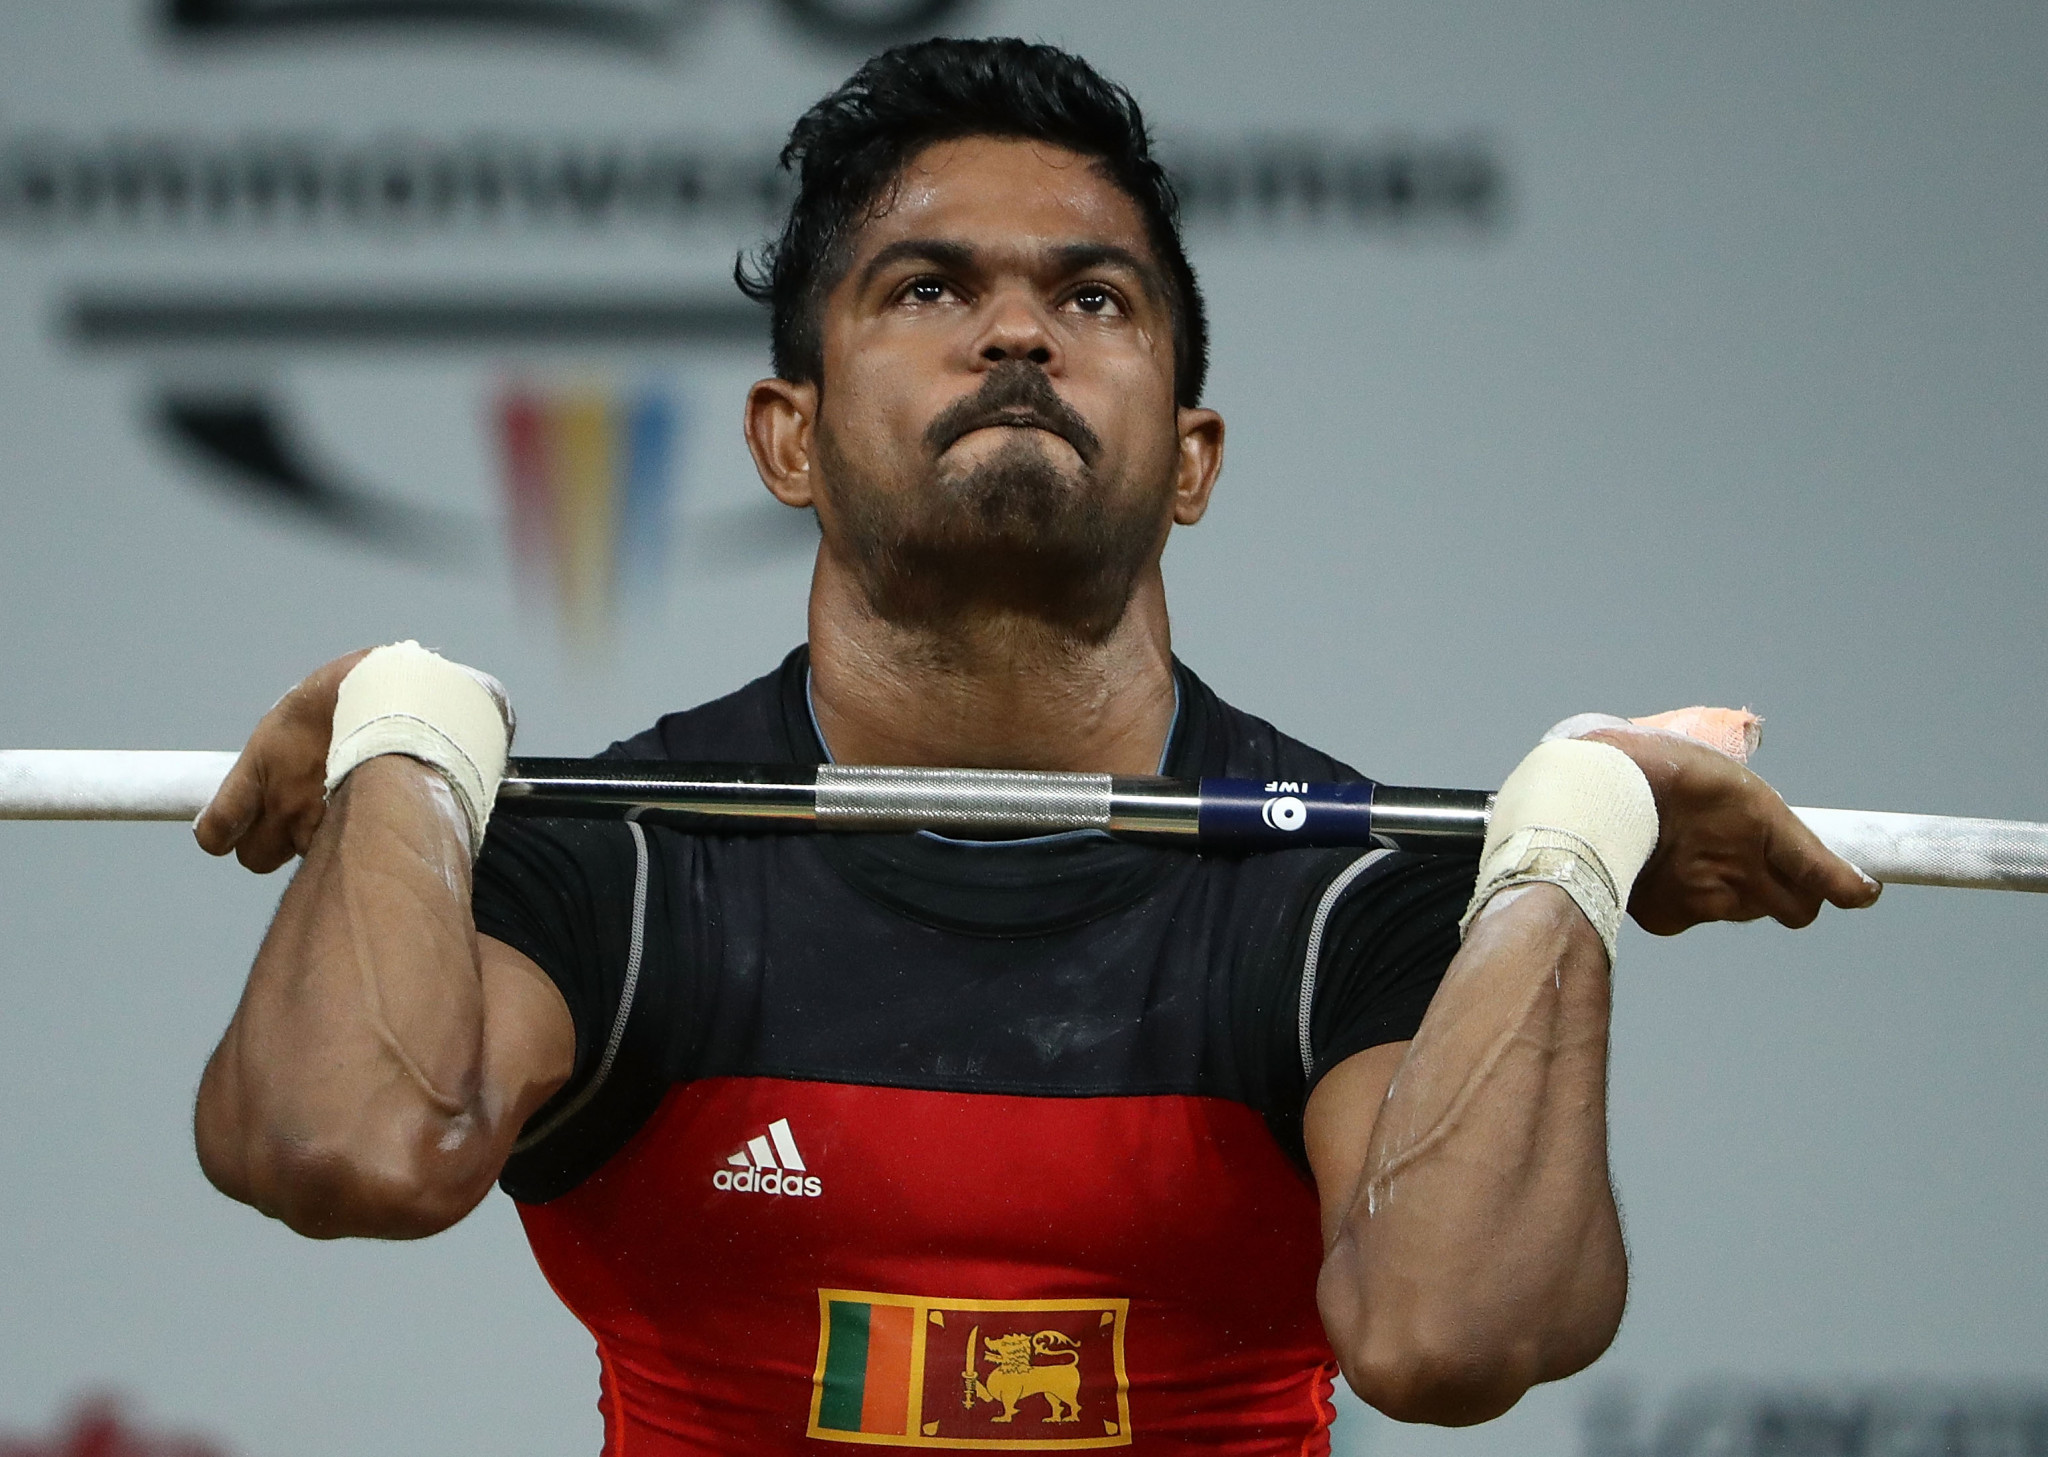 Commonwealth silver medallist Indika Dissanayake will be part of a strong weightlifting team ©Getty Images